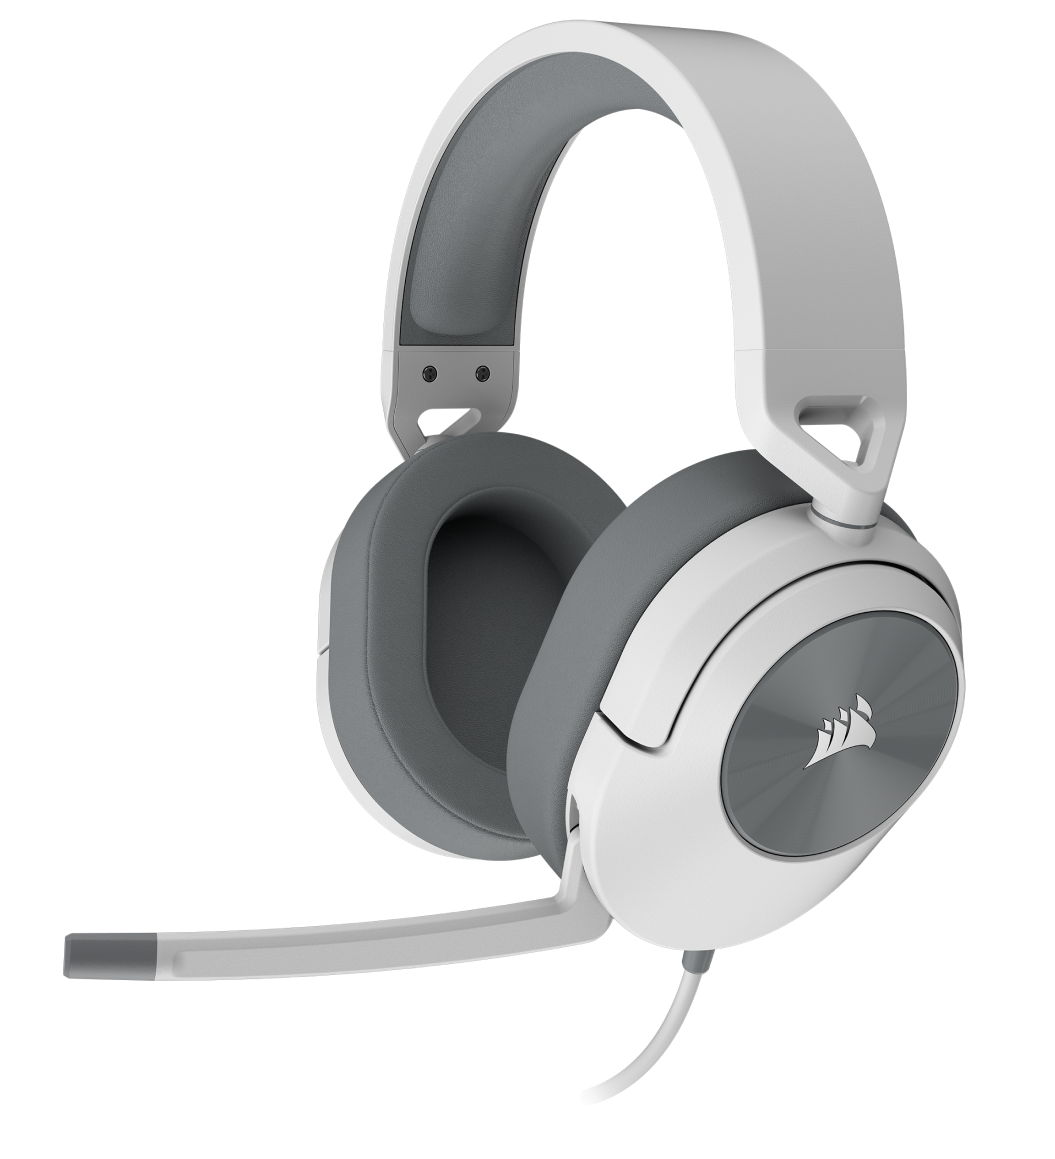 HS55 SURROUND wired gaming headset with visualization of 7.1 surround audio. 